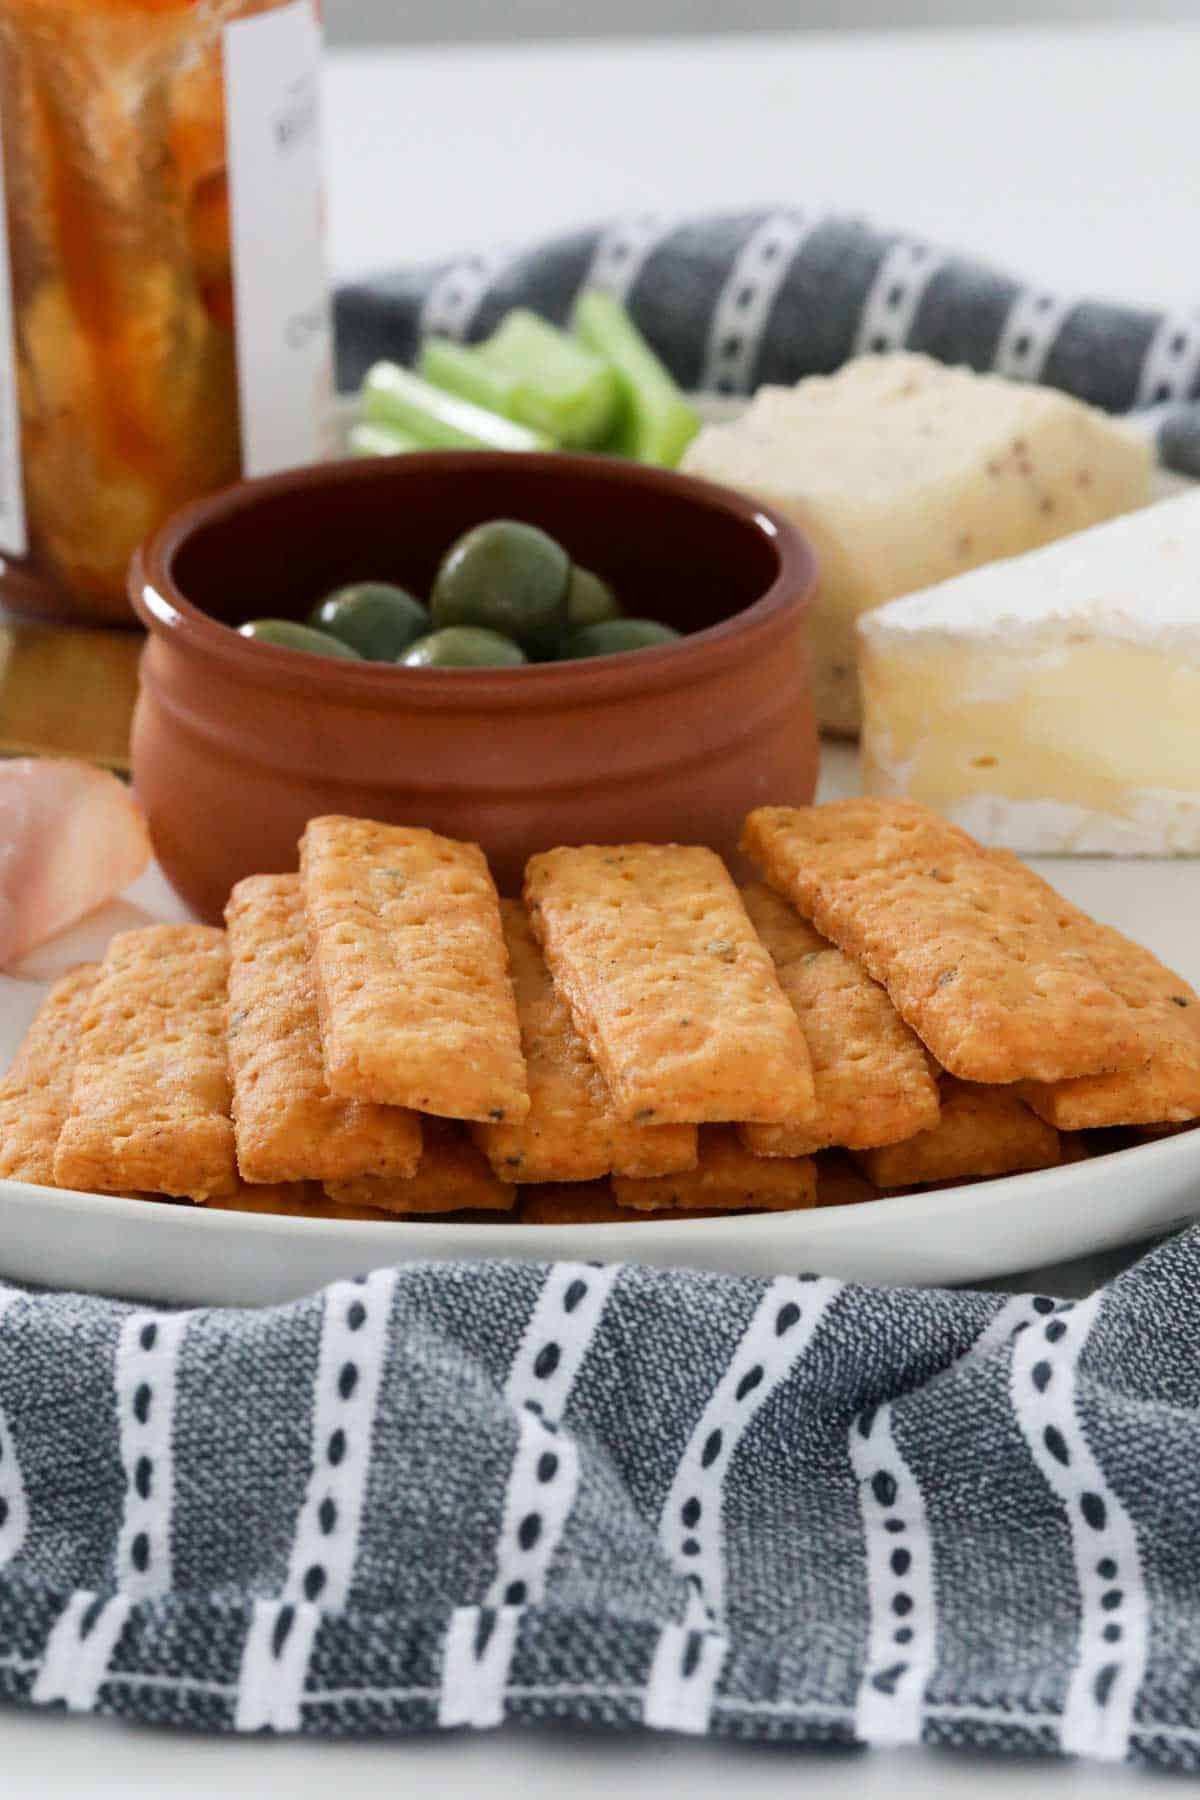 Cheese sticks served with a bowl of green olives.